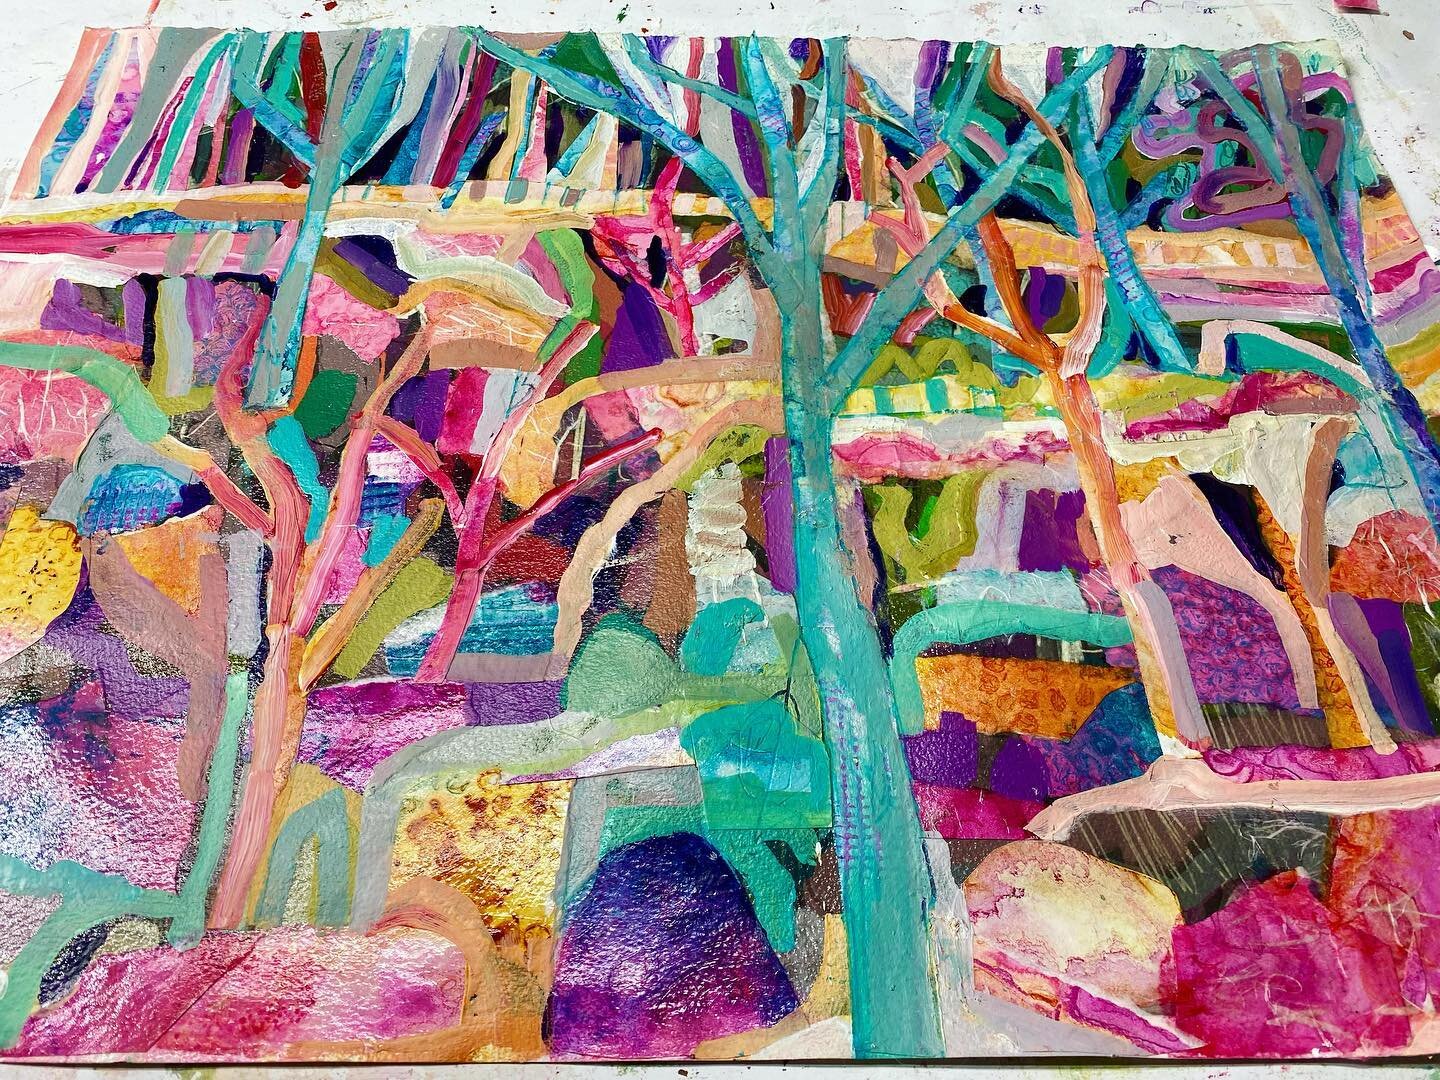 This piece is currently a work in progress. To be honest I&rsquo;m feeling a little lost with this one from a composition point of view but loving the colours. Inspiration was a magical walk in The Minnamurra Rain Forest. @sharonblairart